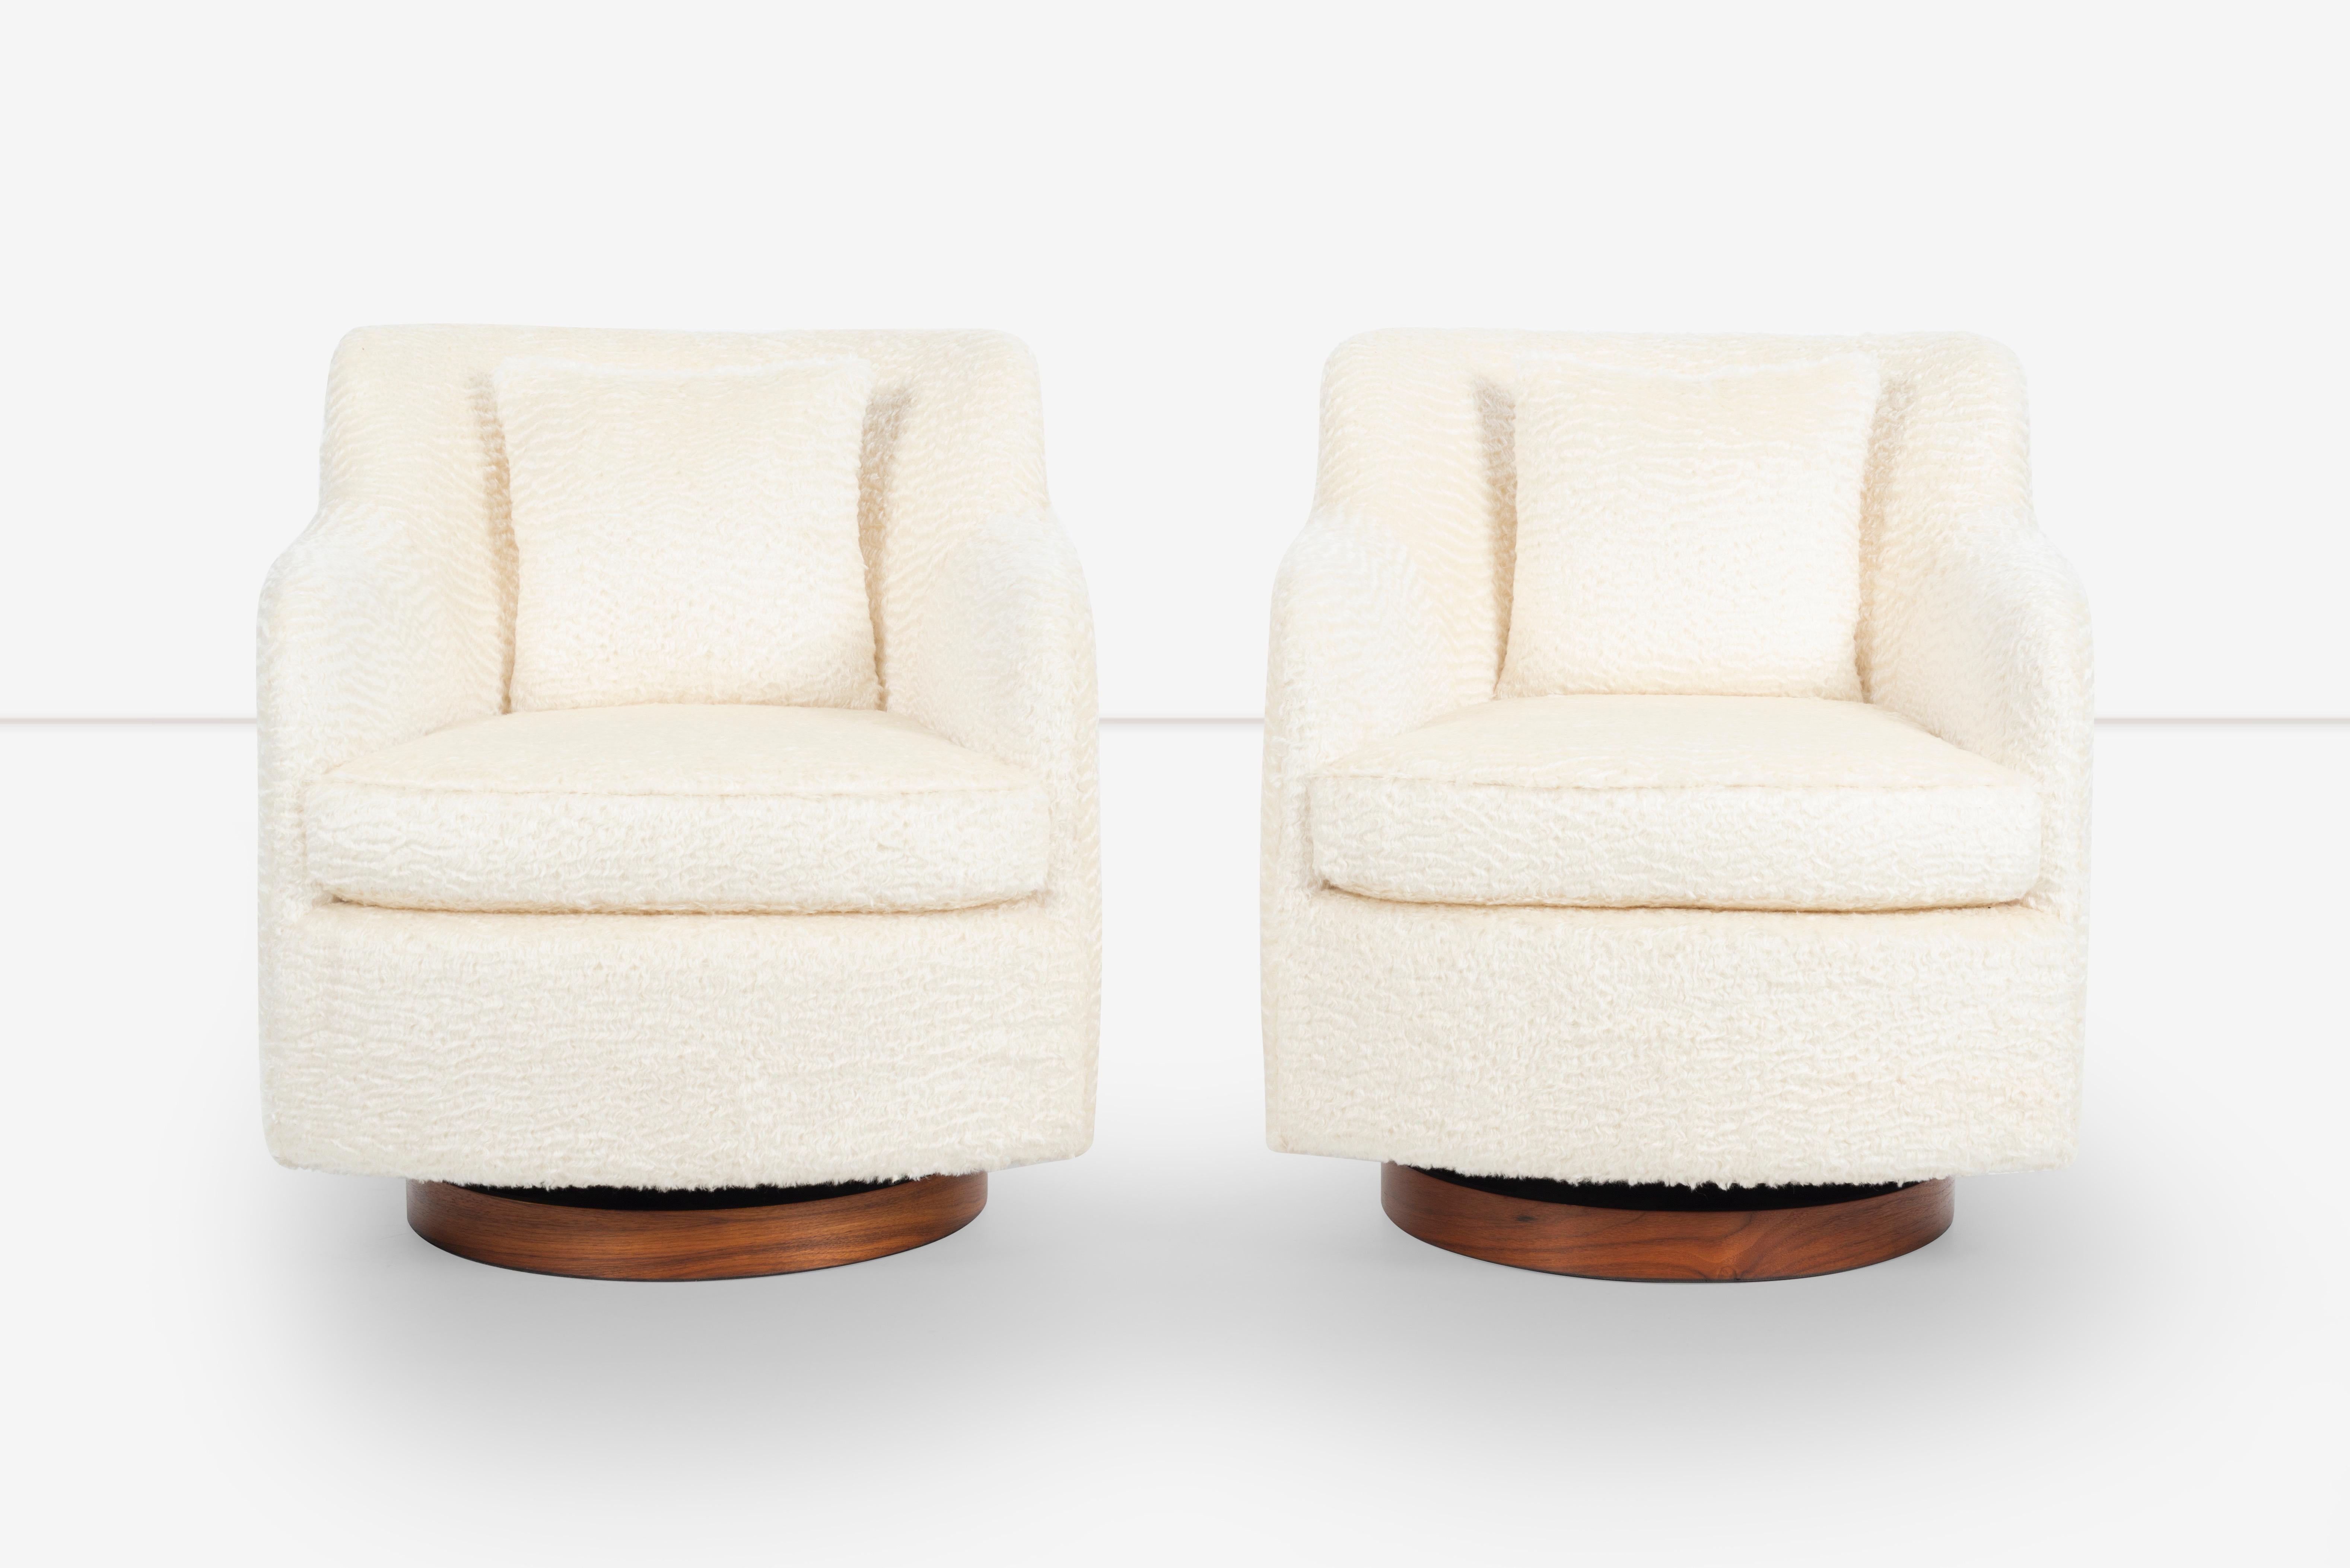 Milo Baughman created some of the most luxurious and sought-after pieces of Mid-Century Modern furniture. These chairs feature a plush, soft mohair upholstery that adds a touch of glamour and sophistication to any room. The walnut base provides a